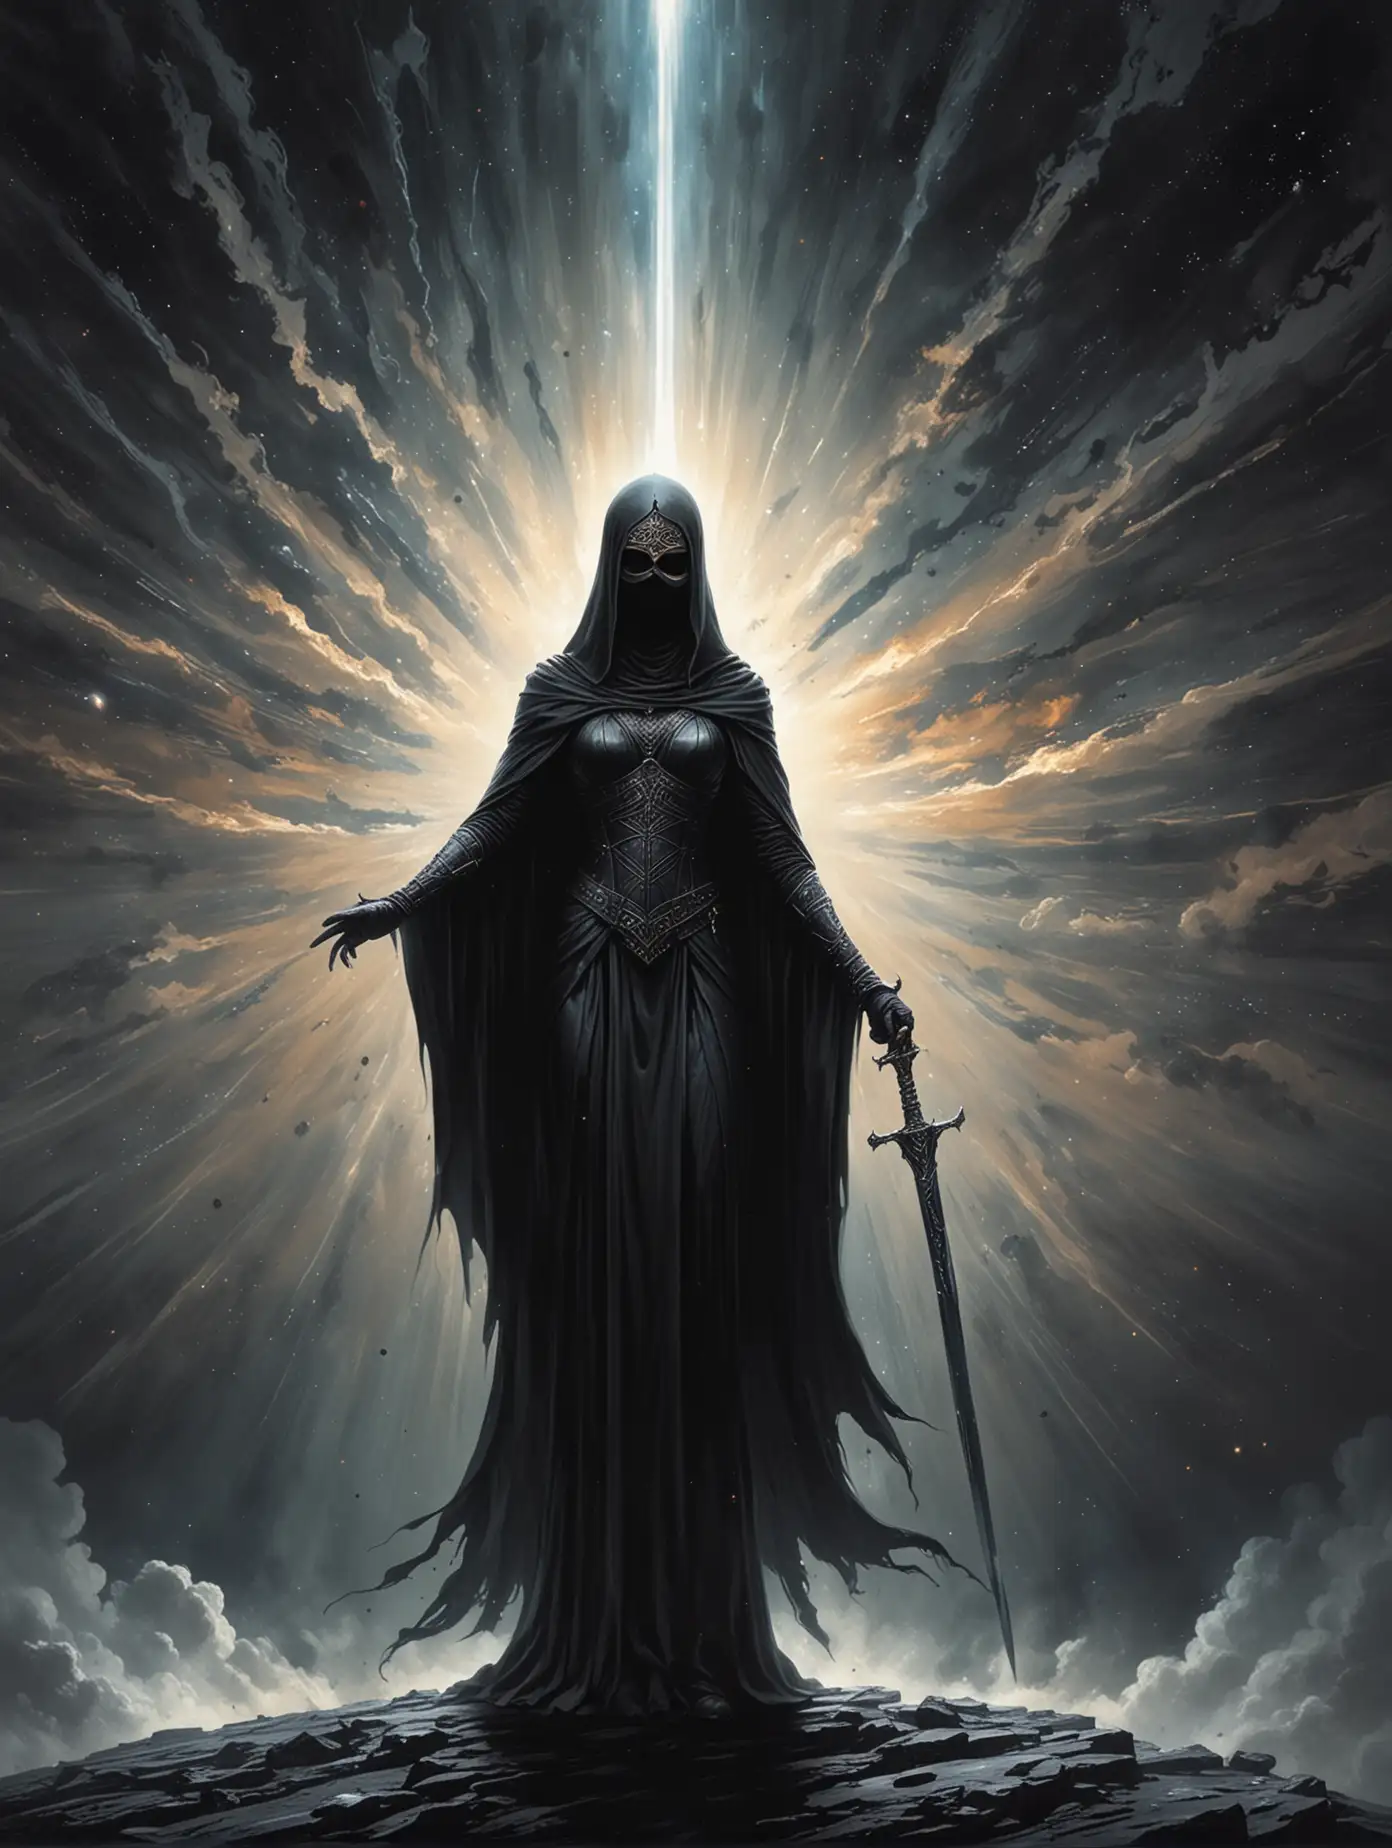 Sister-Geserit-Stands-Tall-at-the-Edge-of-a-Black-Hole-with-Cosmic-Sword